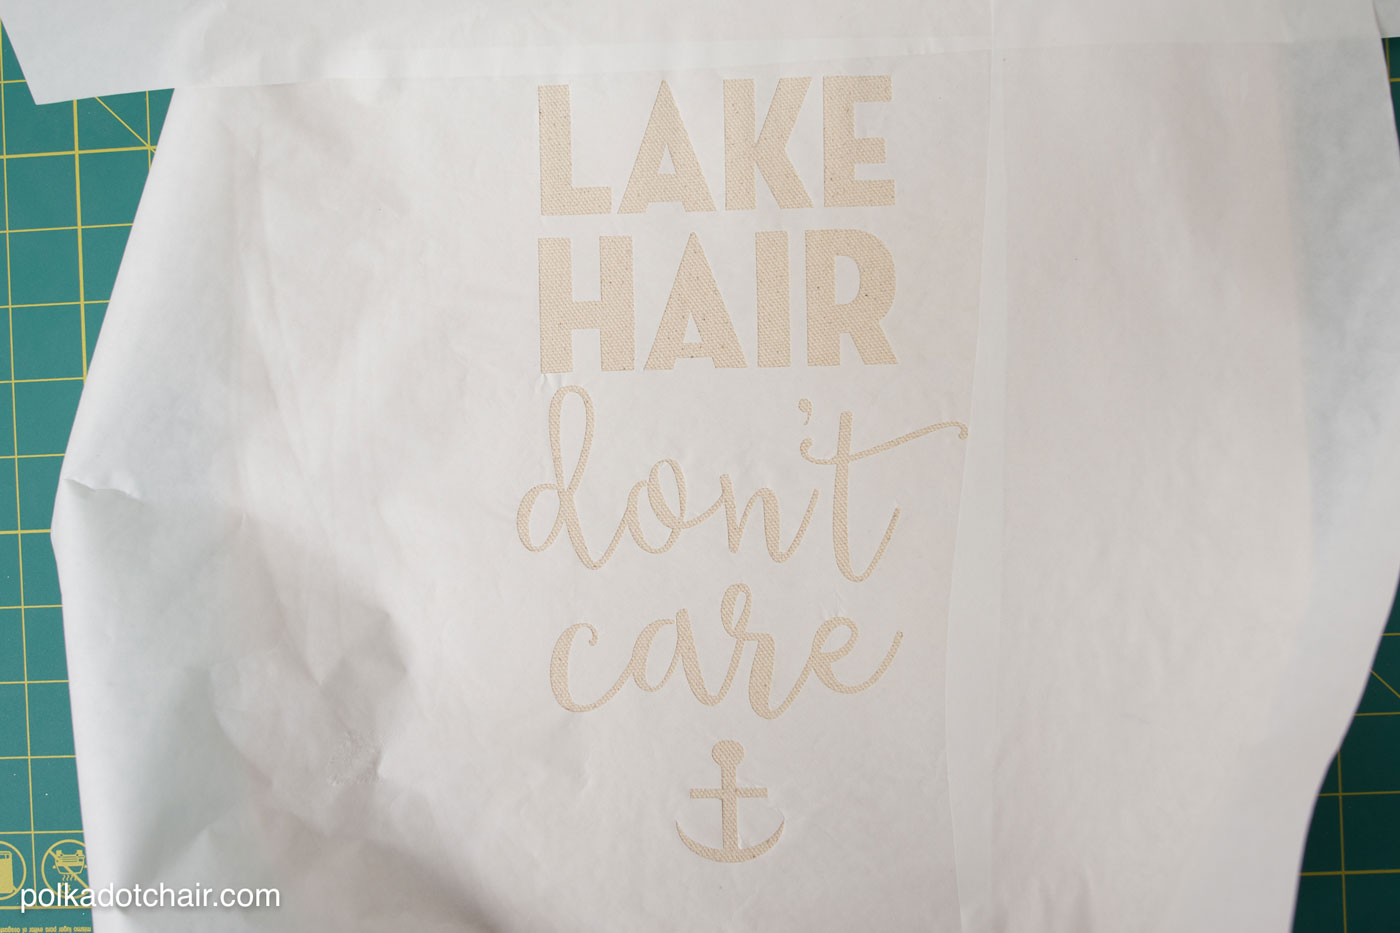 DIY "Lake Hair Don't Care" Stenciled Summer Tote bag with free svg file download by Melissa of polkadotchair.com